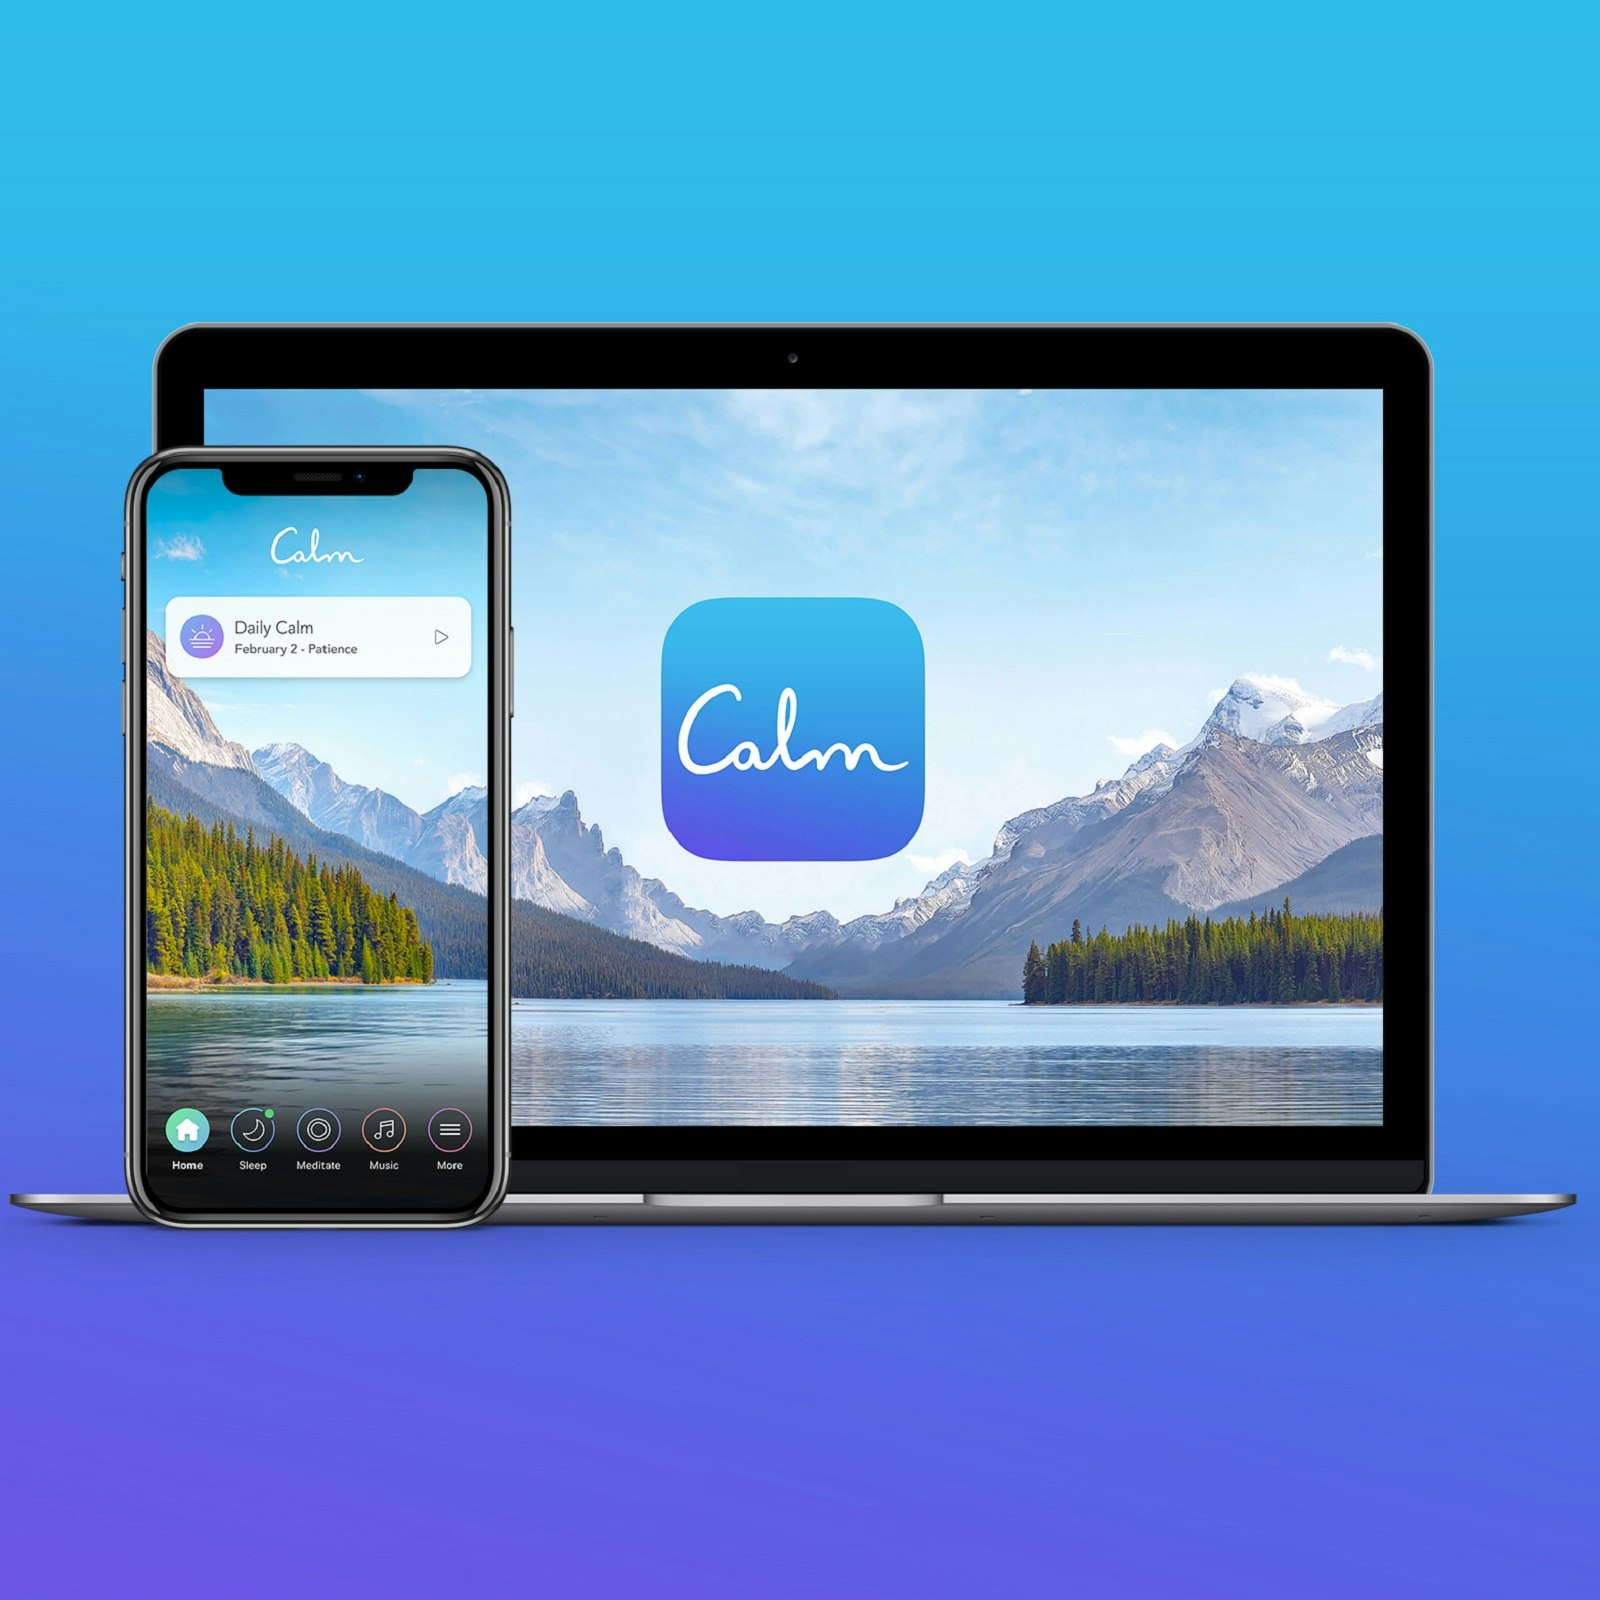 A laptop and smart phone sit facing the camera, both have a lake and mountain scene on them, with the app's title Calm across the middle.